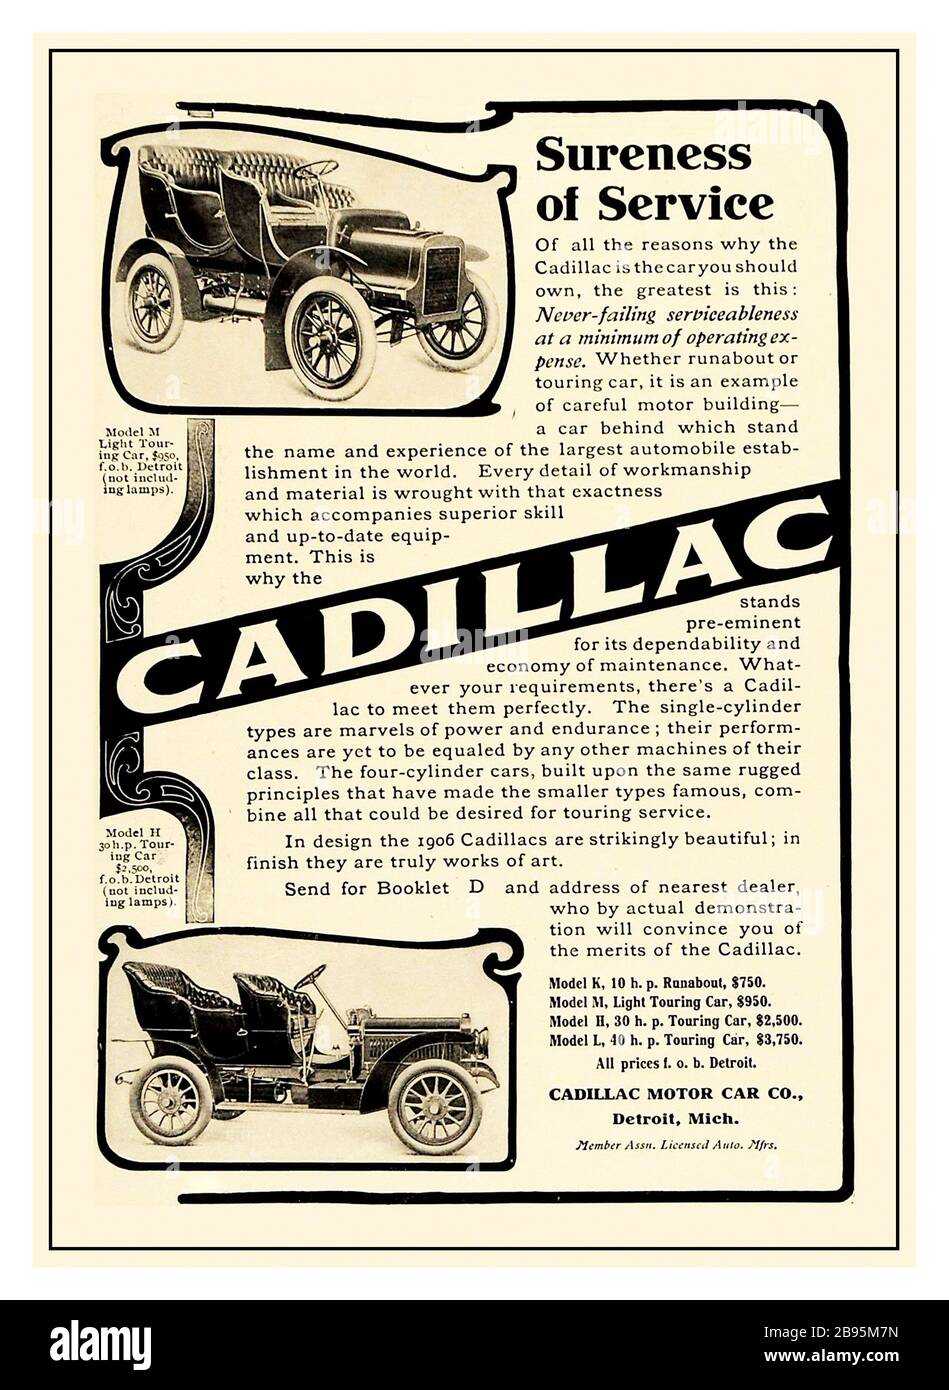 Vintage 1906 Cadillac advertisement 'sureness of service' 1906 black and white print ad for the Cadillac Model M Light Touring Car and Model H Touring Car from Cadillac Motor Car Company located in Detroit, Michigan. Cadillac Motor Company USA Stock Photo